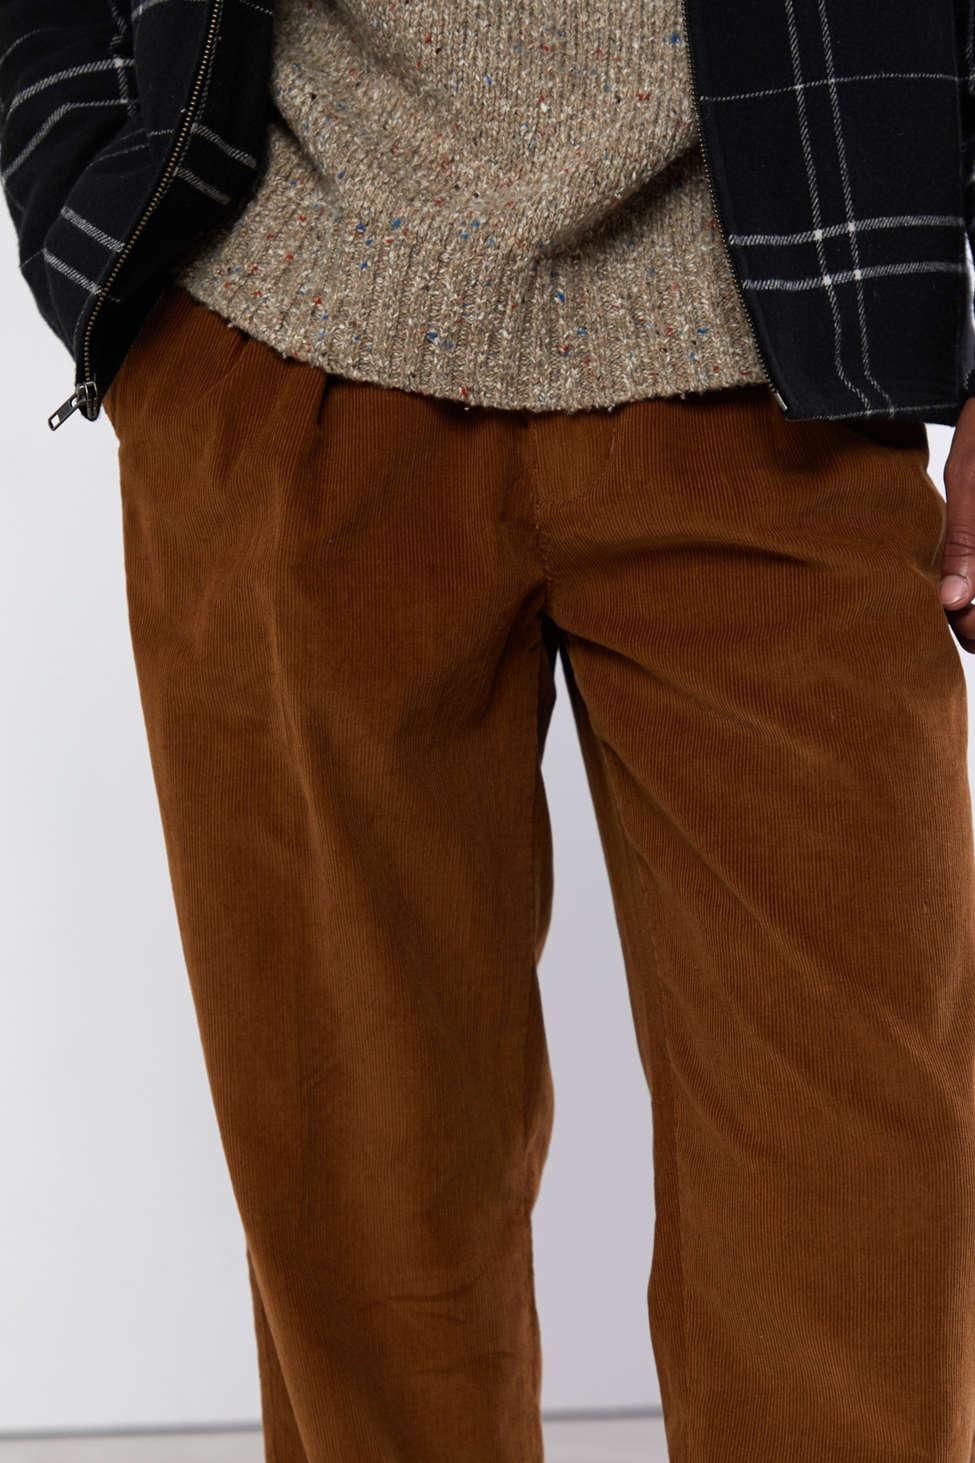 Urban Outfitters Uo Double Pleated Corduroy Pant in Brown for Men - Lyst